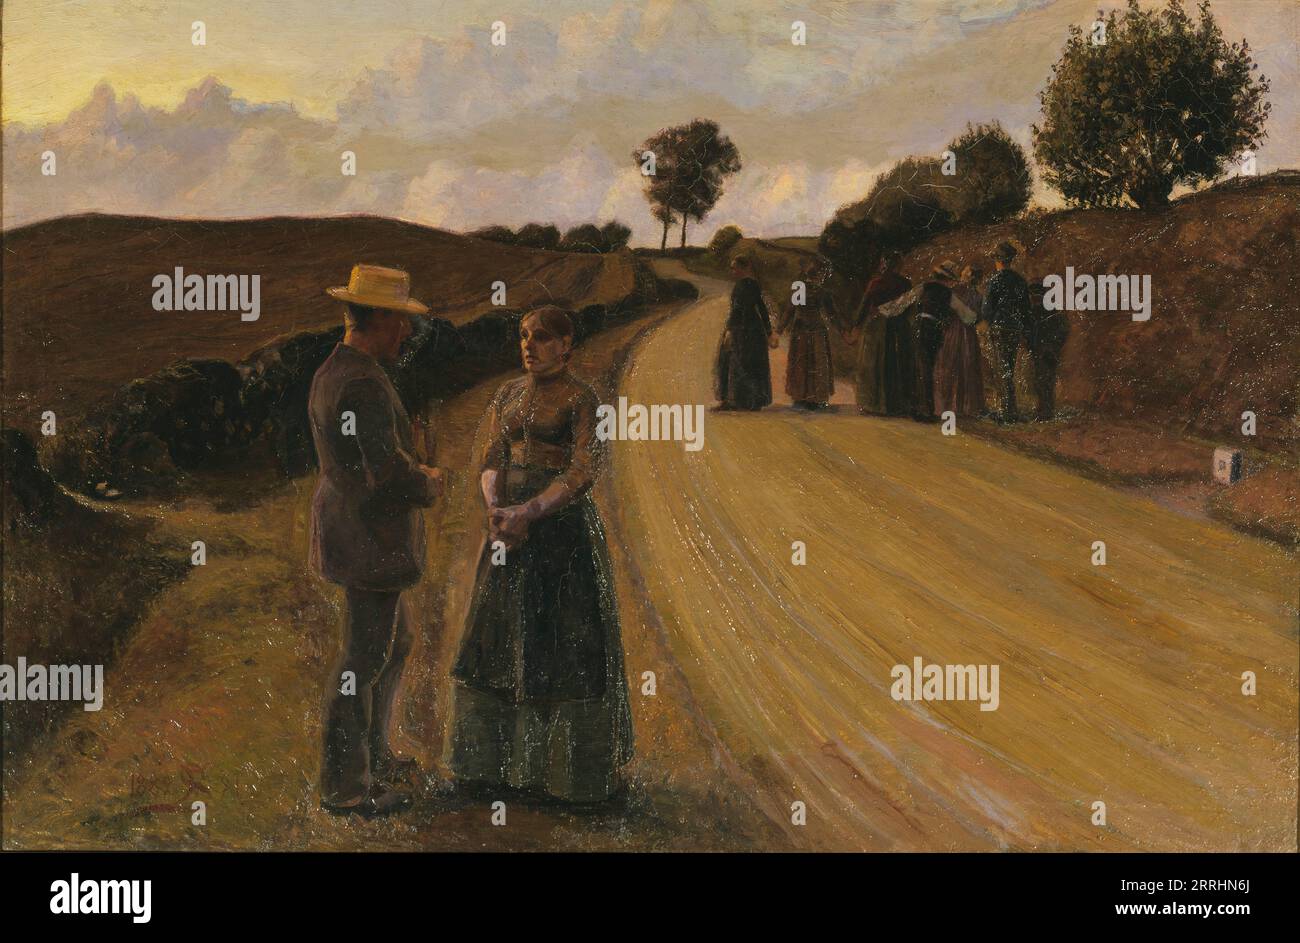 Evening Meeting on a Road, 1889. Stock Photo